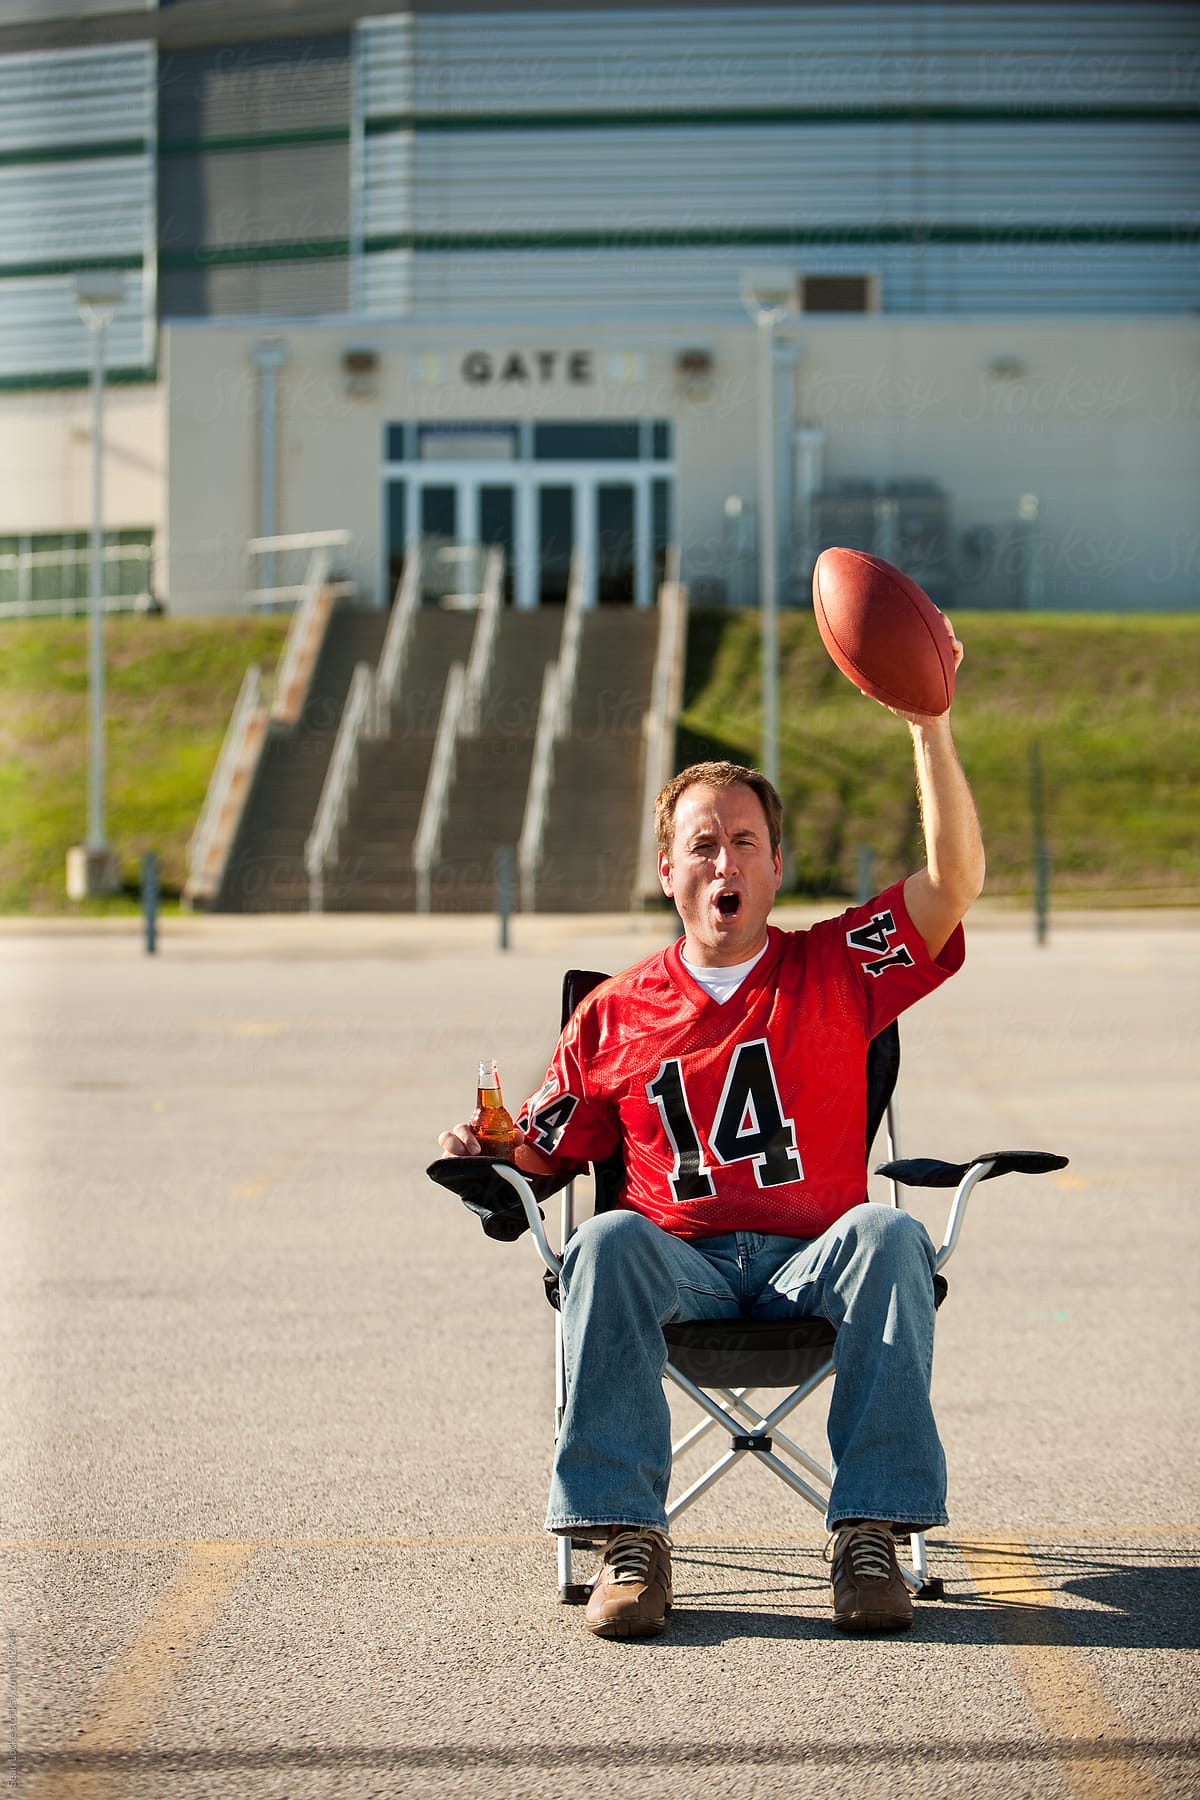 Tailgating: Fan Sits Alone in Lot Waiting for Game